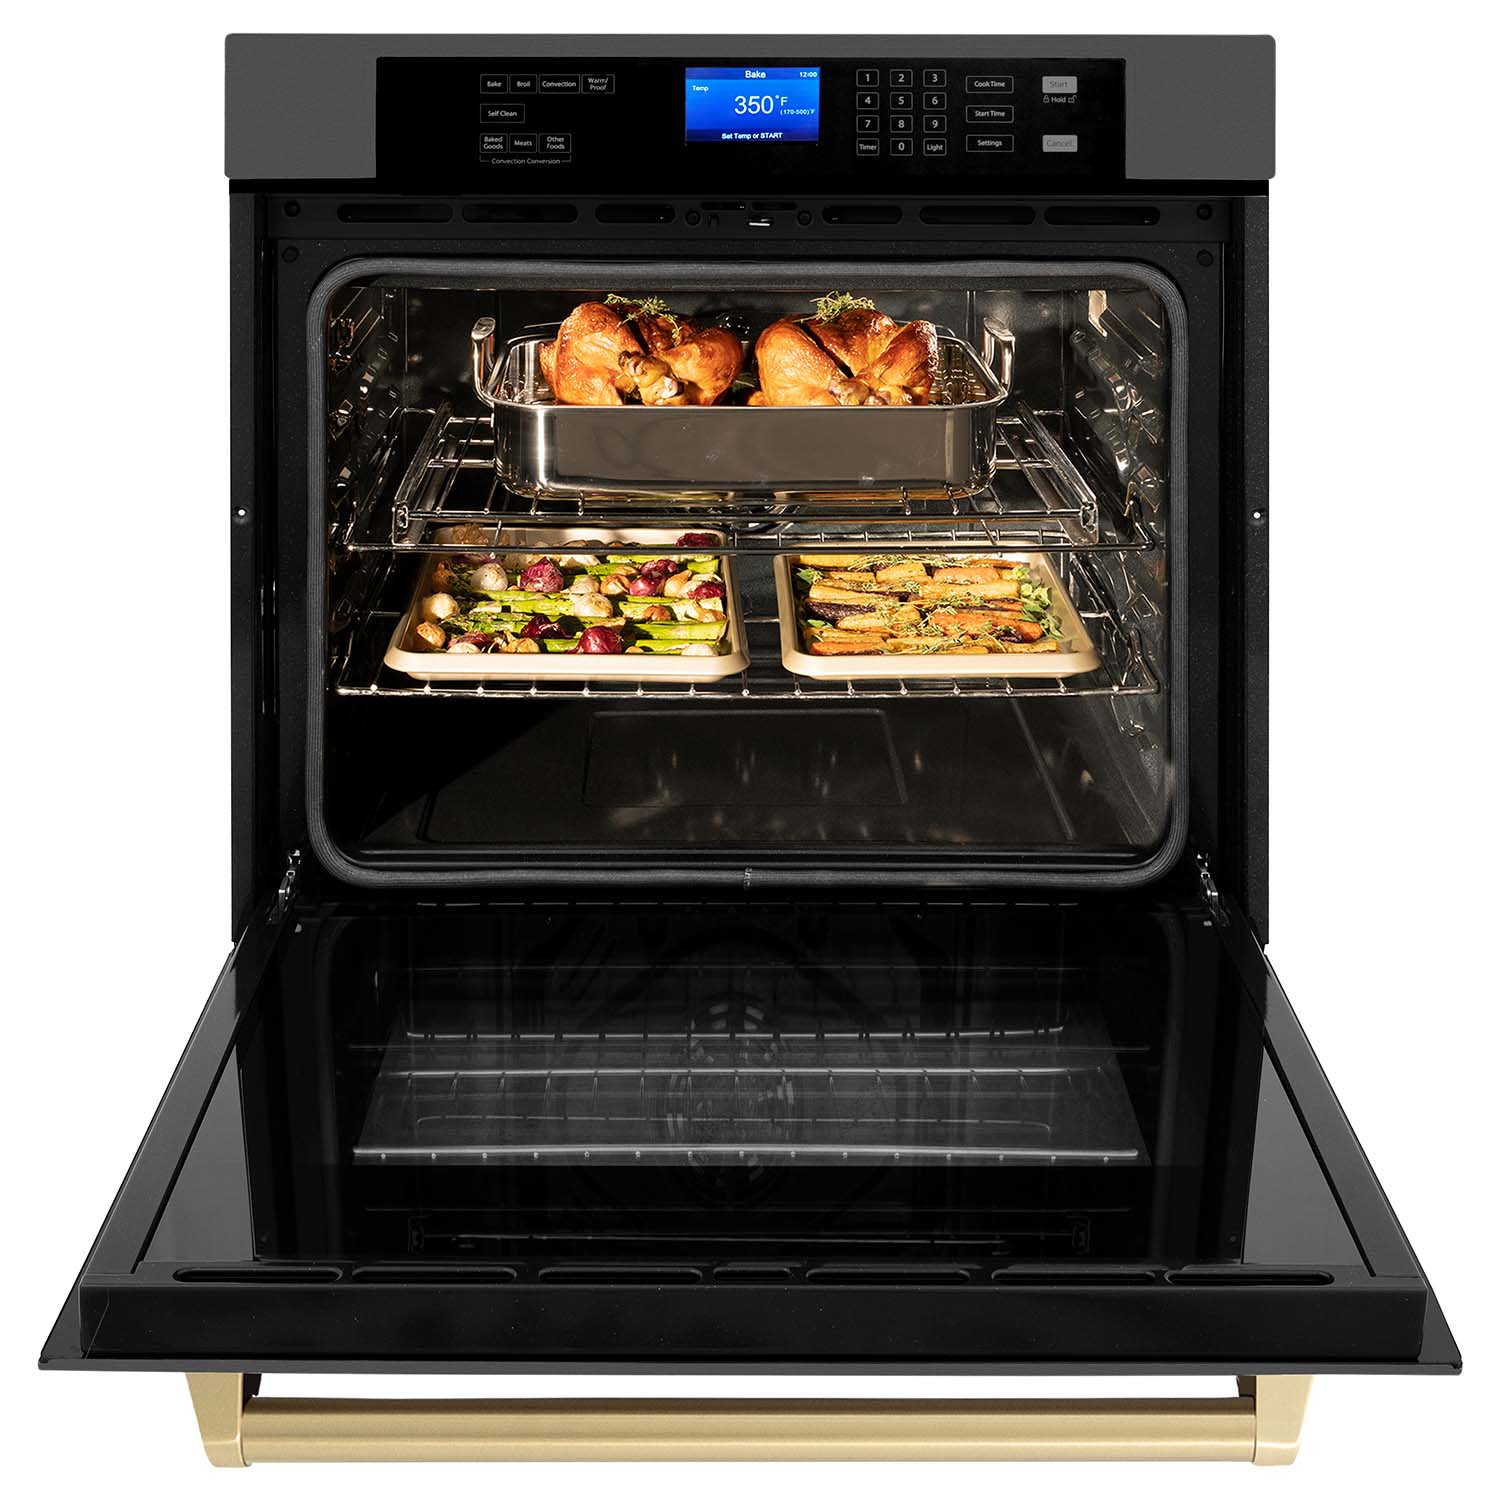 ZLINE 30" Autograph Edition Single Wall Oven - Black Stainless Steel with Accents, Self Clean, True Convection